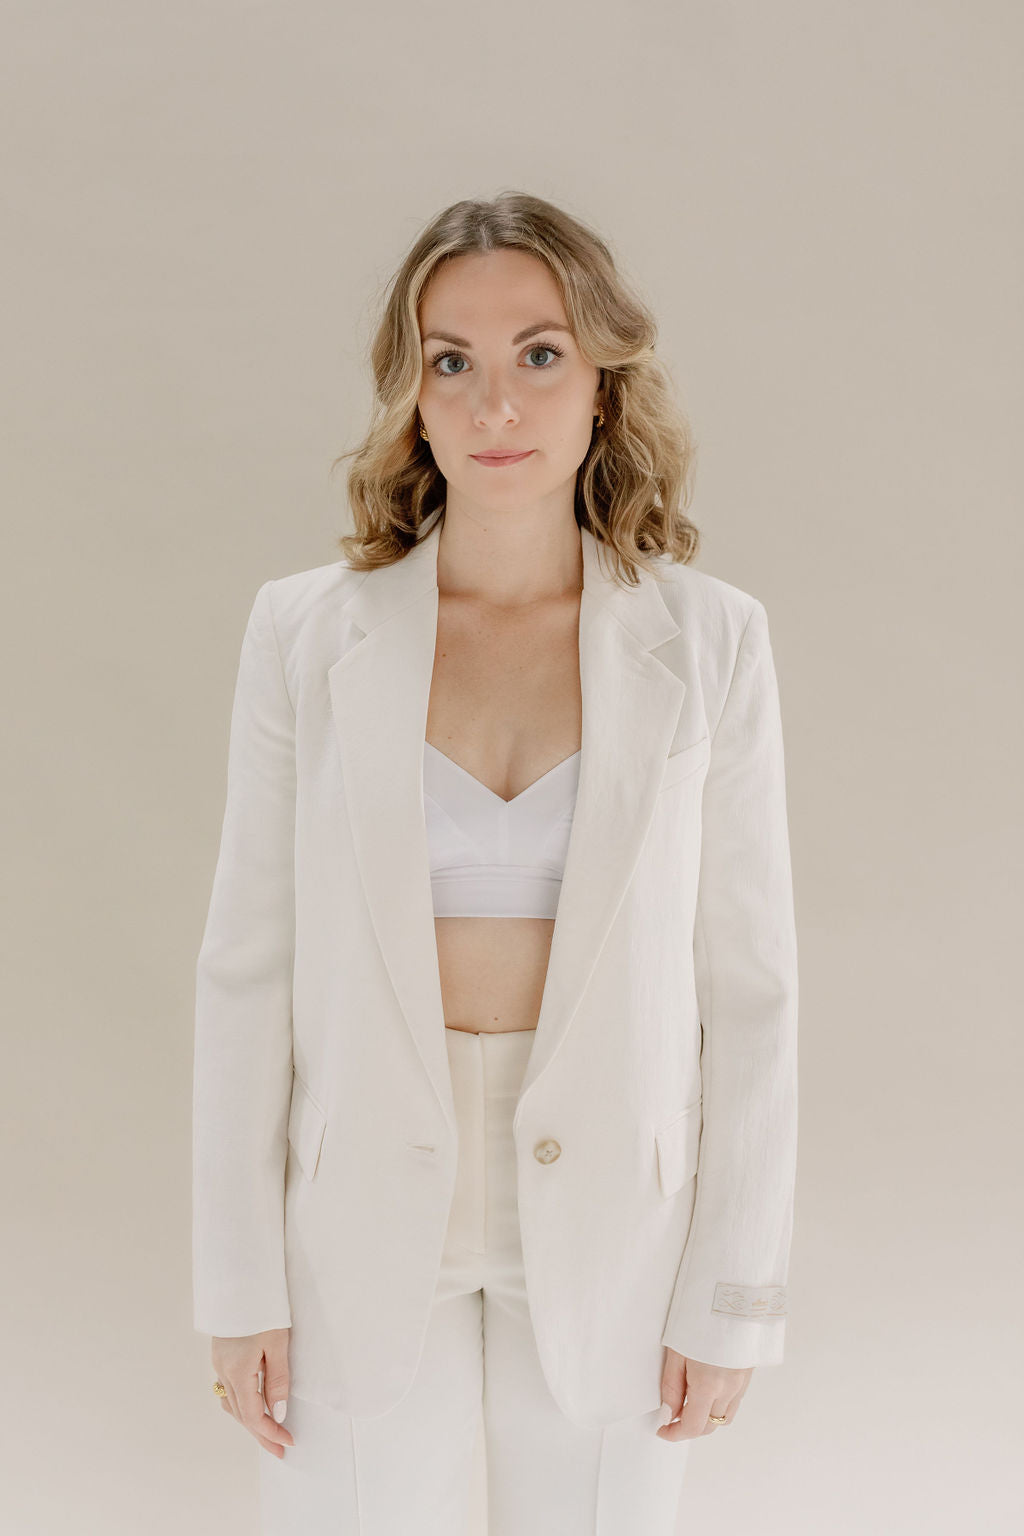 Product shot of white less support in business suit outfit